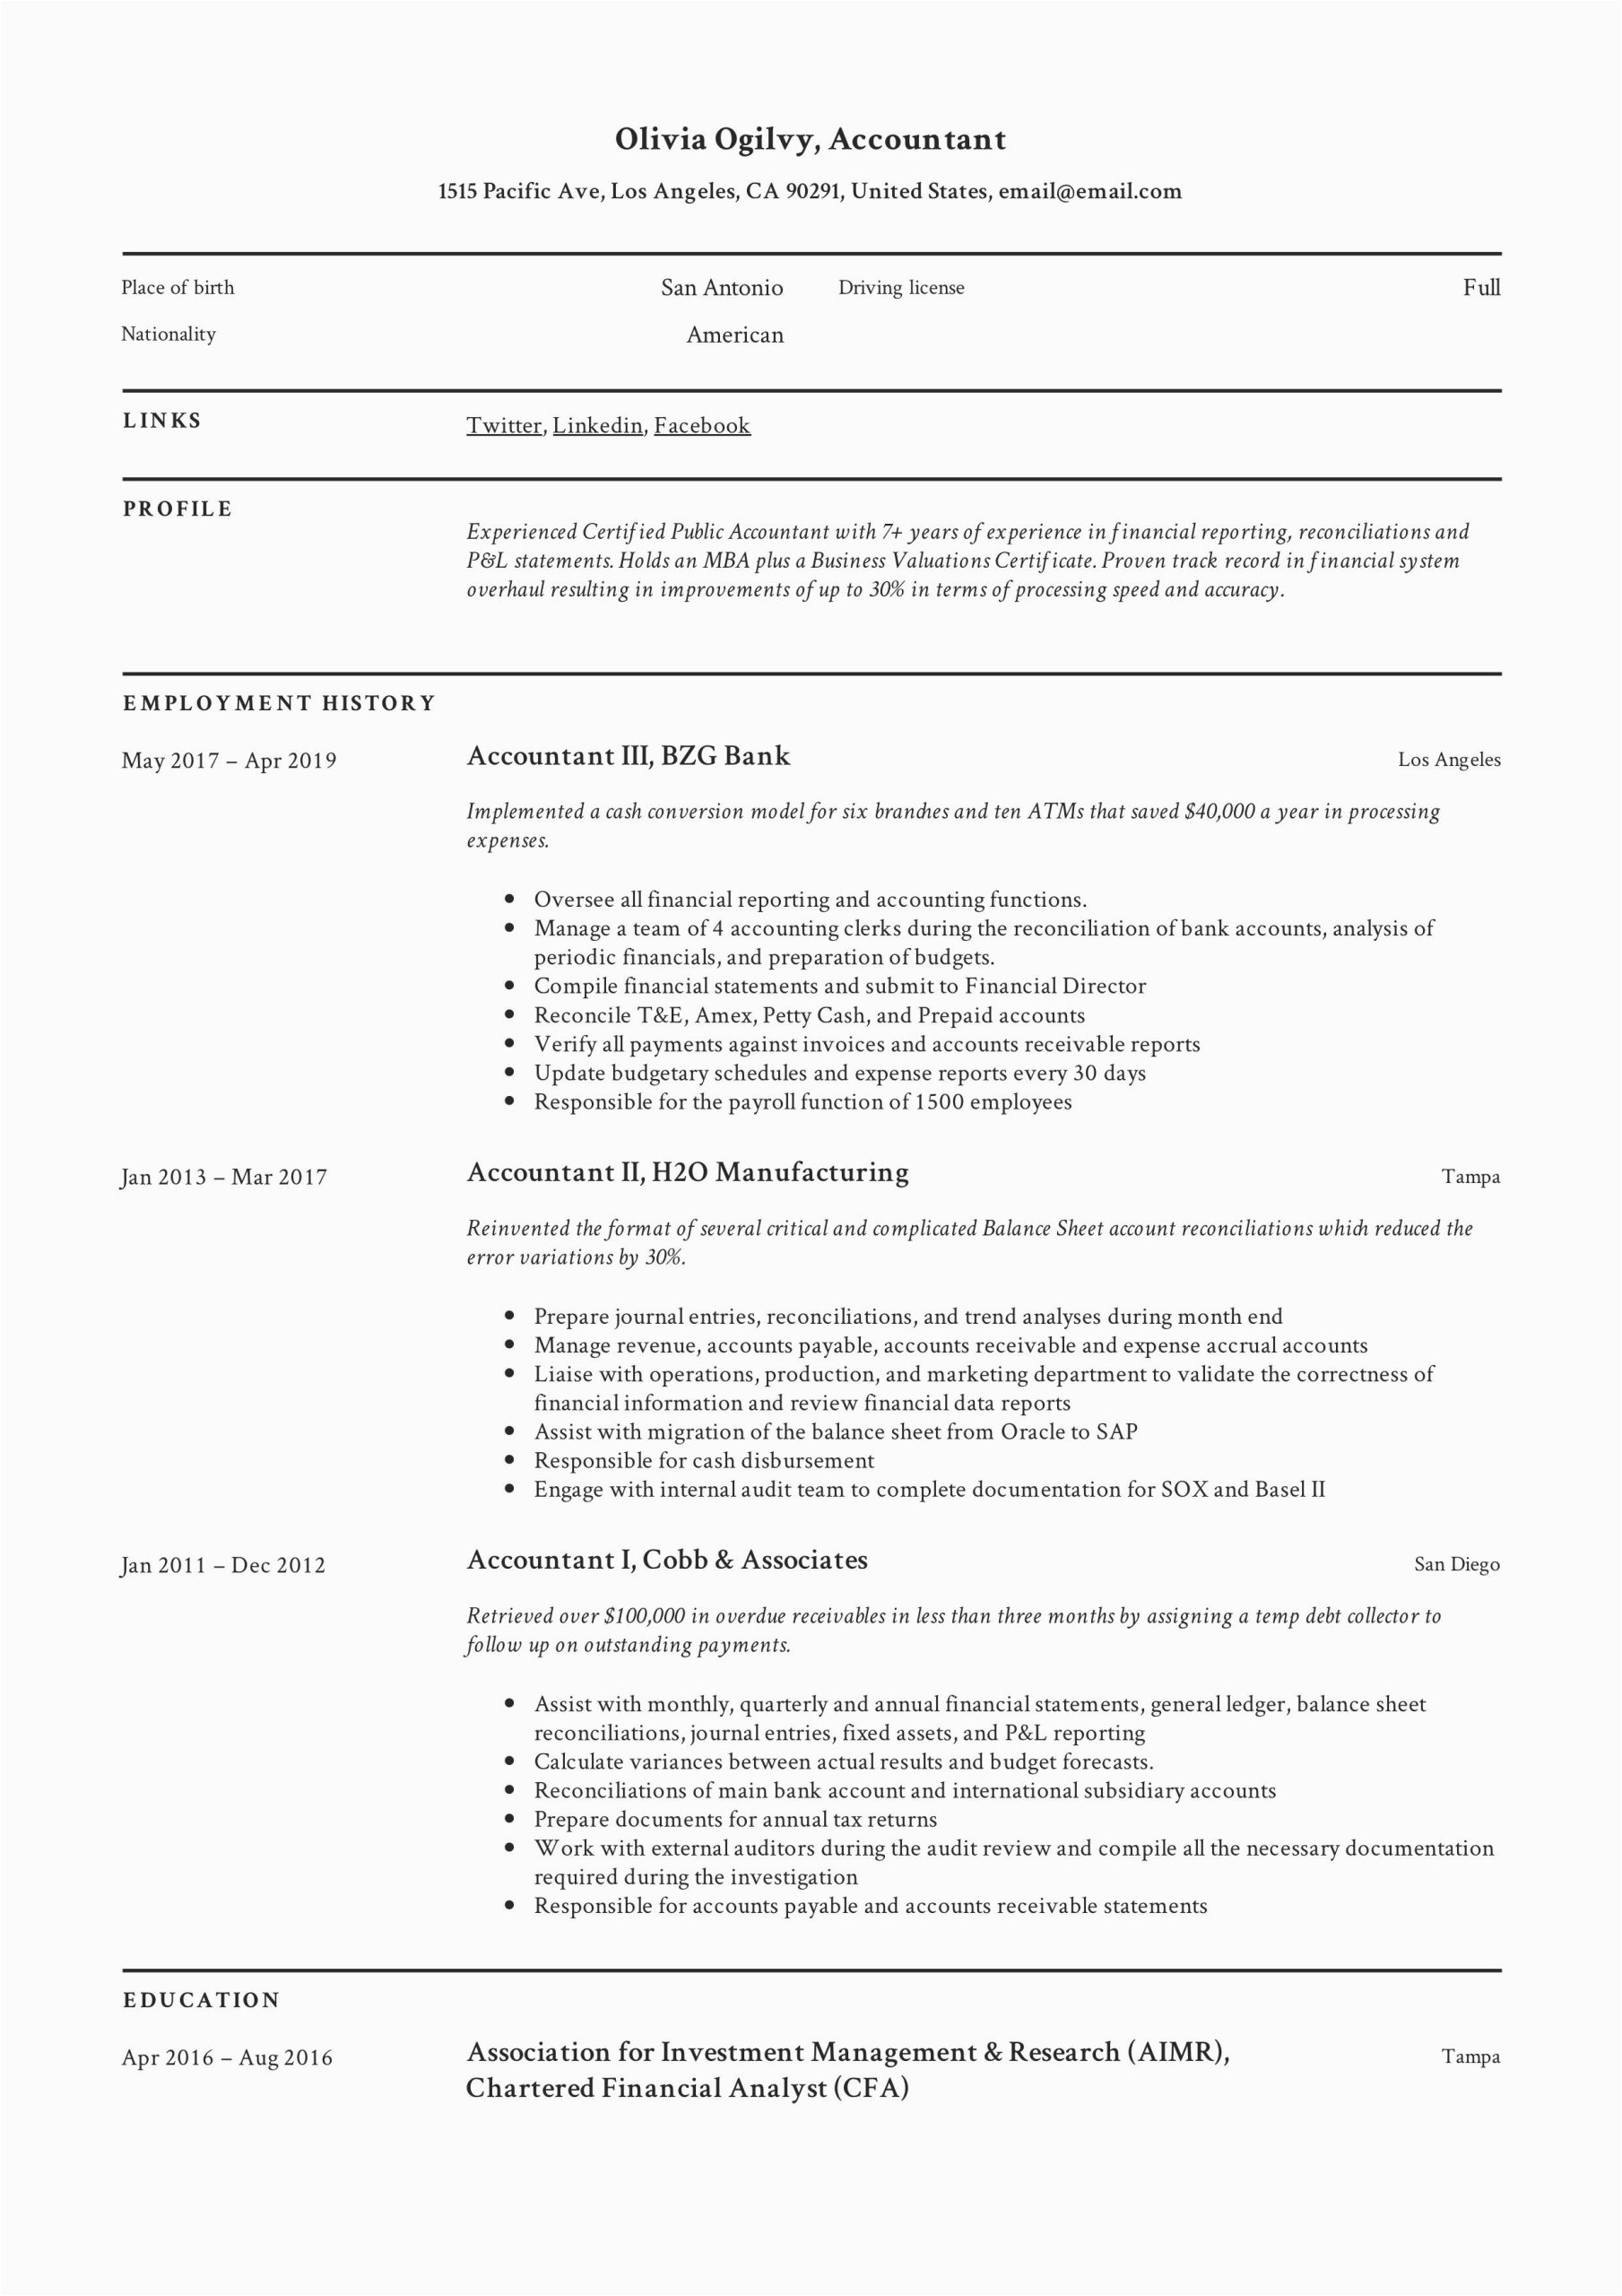 Professional Summary Resume Sample for Accountant Accountant Resume Template